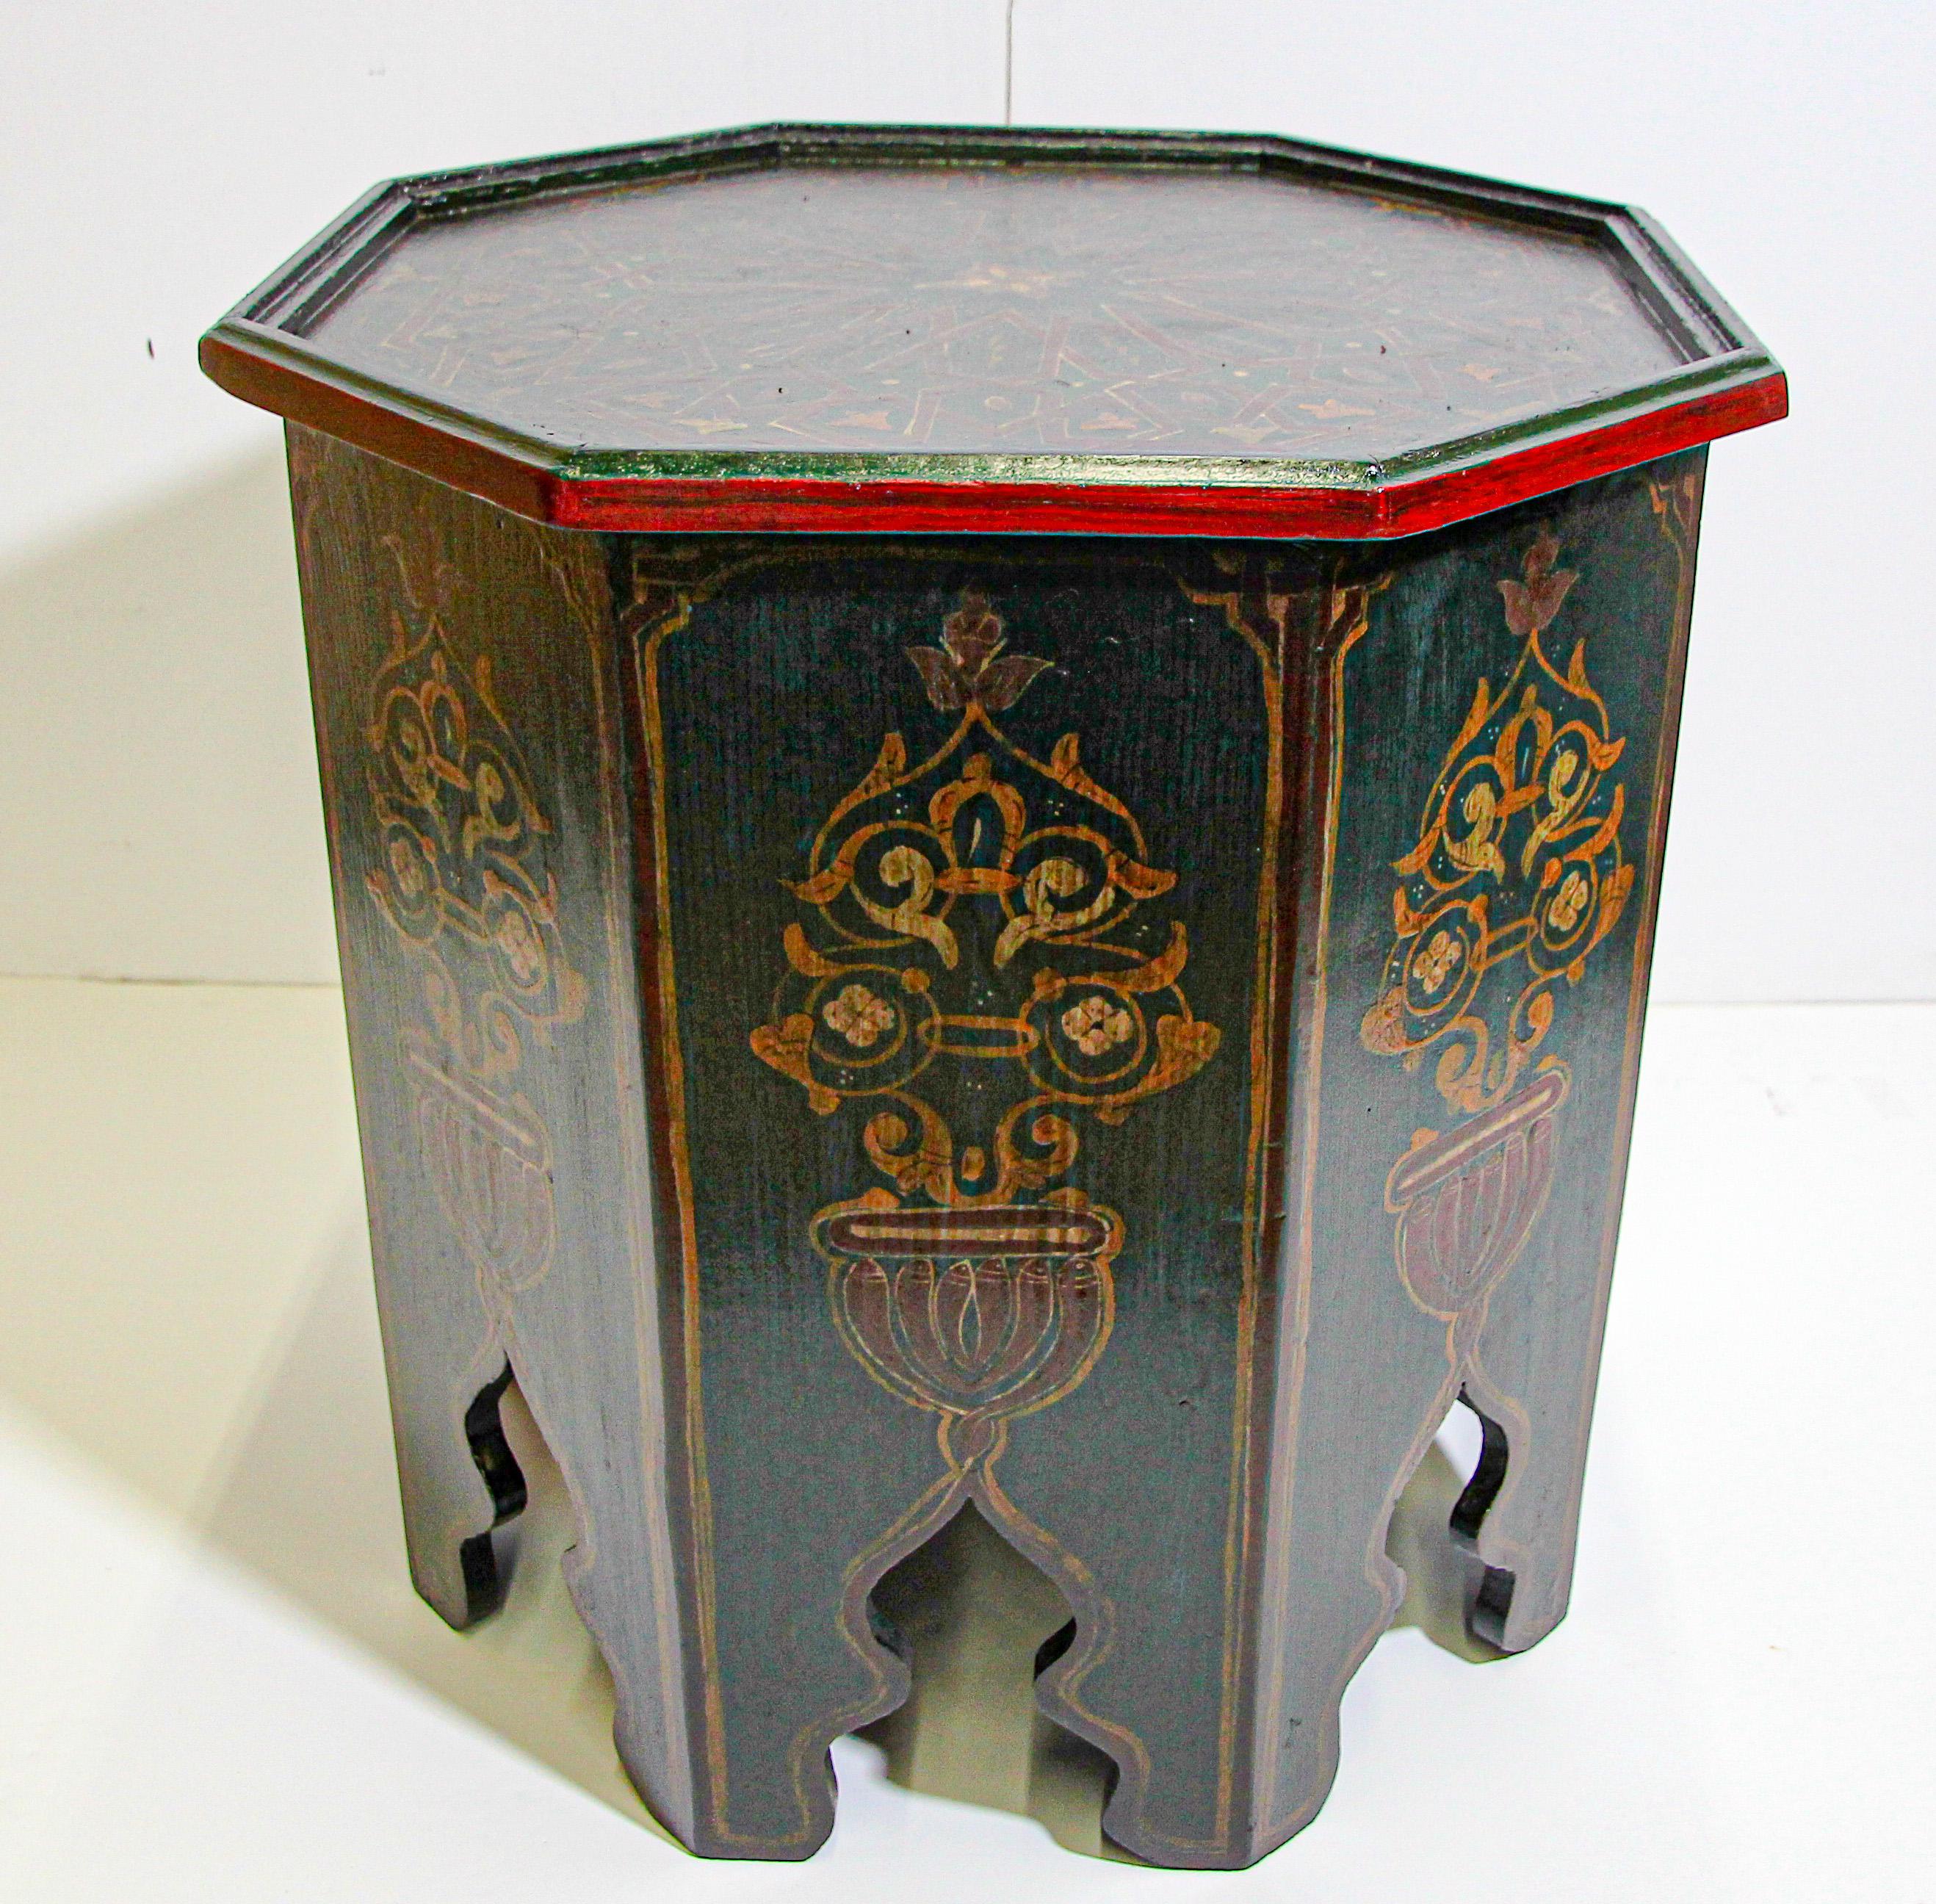 Hand-Crafted Moroccan Hand Painted Table with Moorish Designs